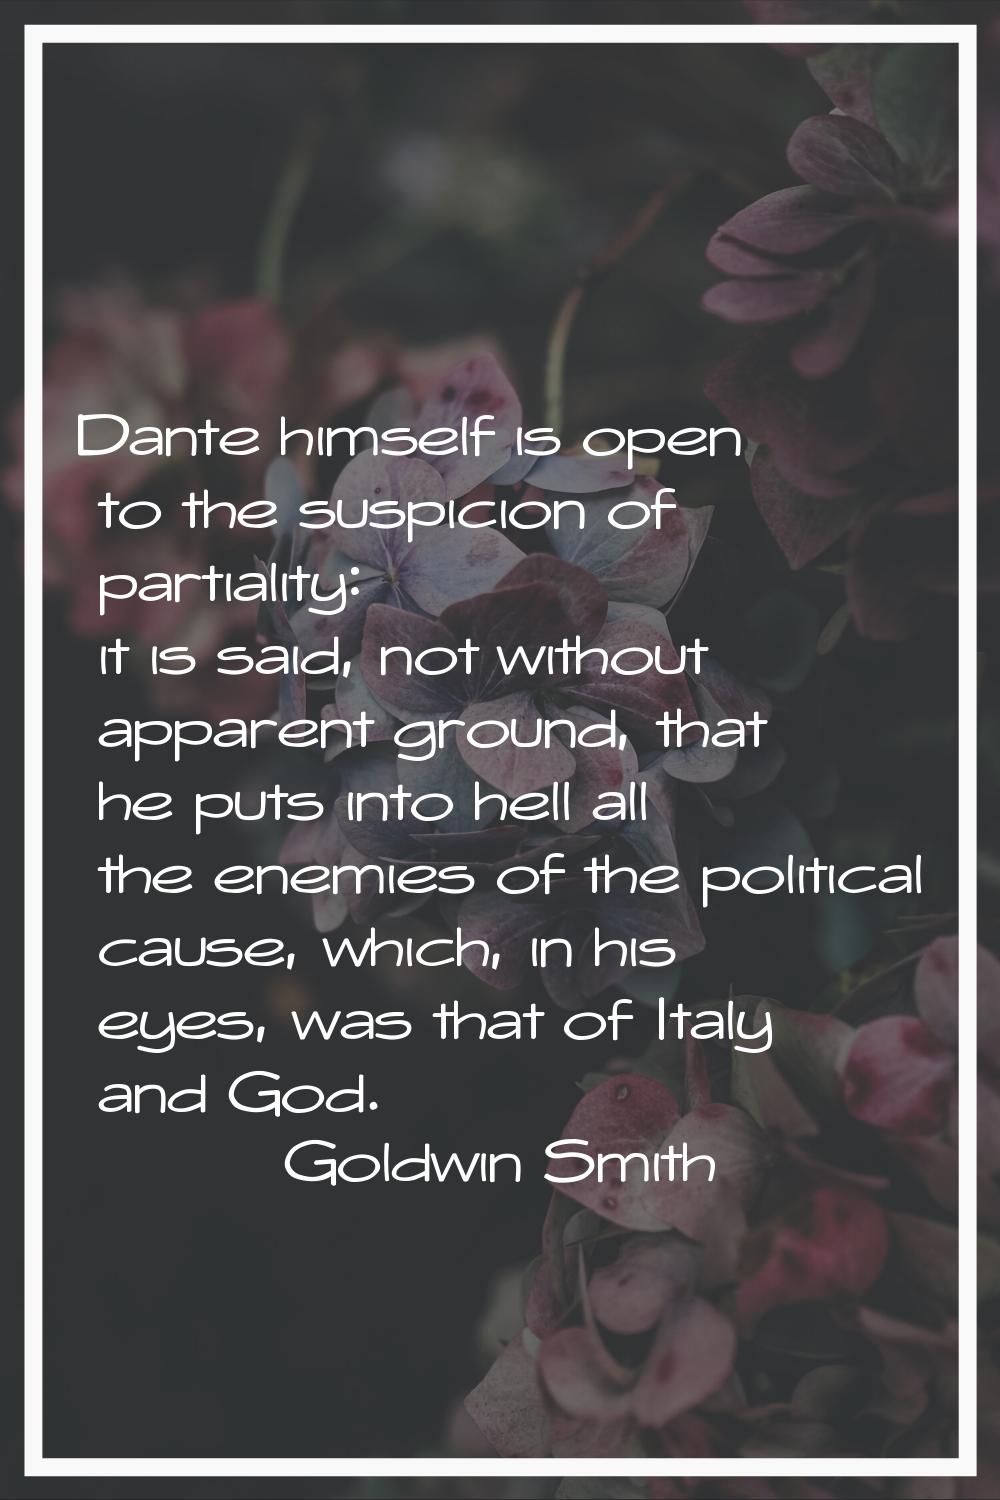 Dante himself is open to the suspicion of partiality: it is said, not without apparent ground, that